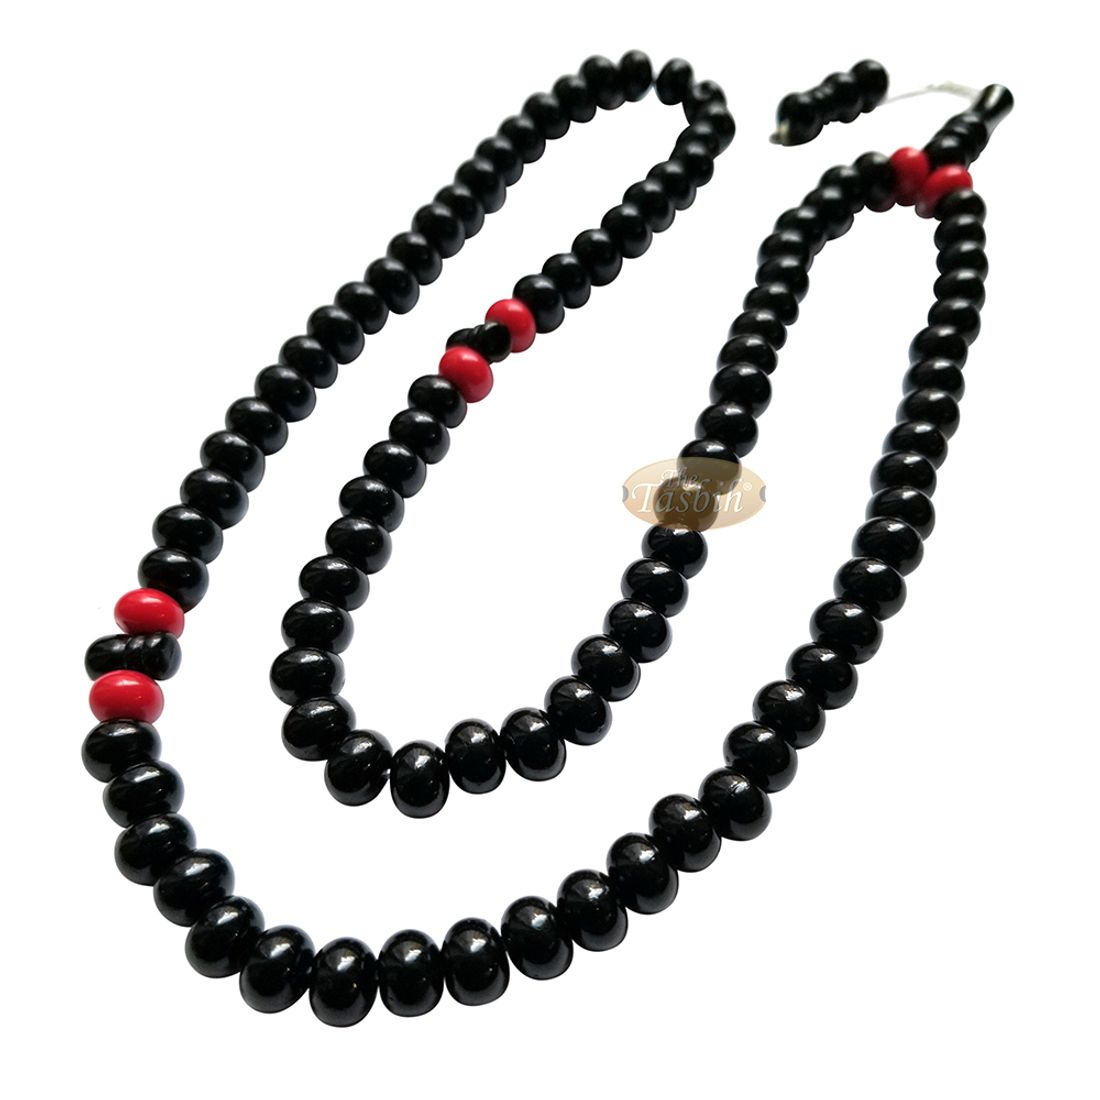 Large Durable Black Plastic Tasbih with Oval 9mm Beads – Sturdy Rosary – 6 Red Accent Beads